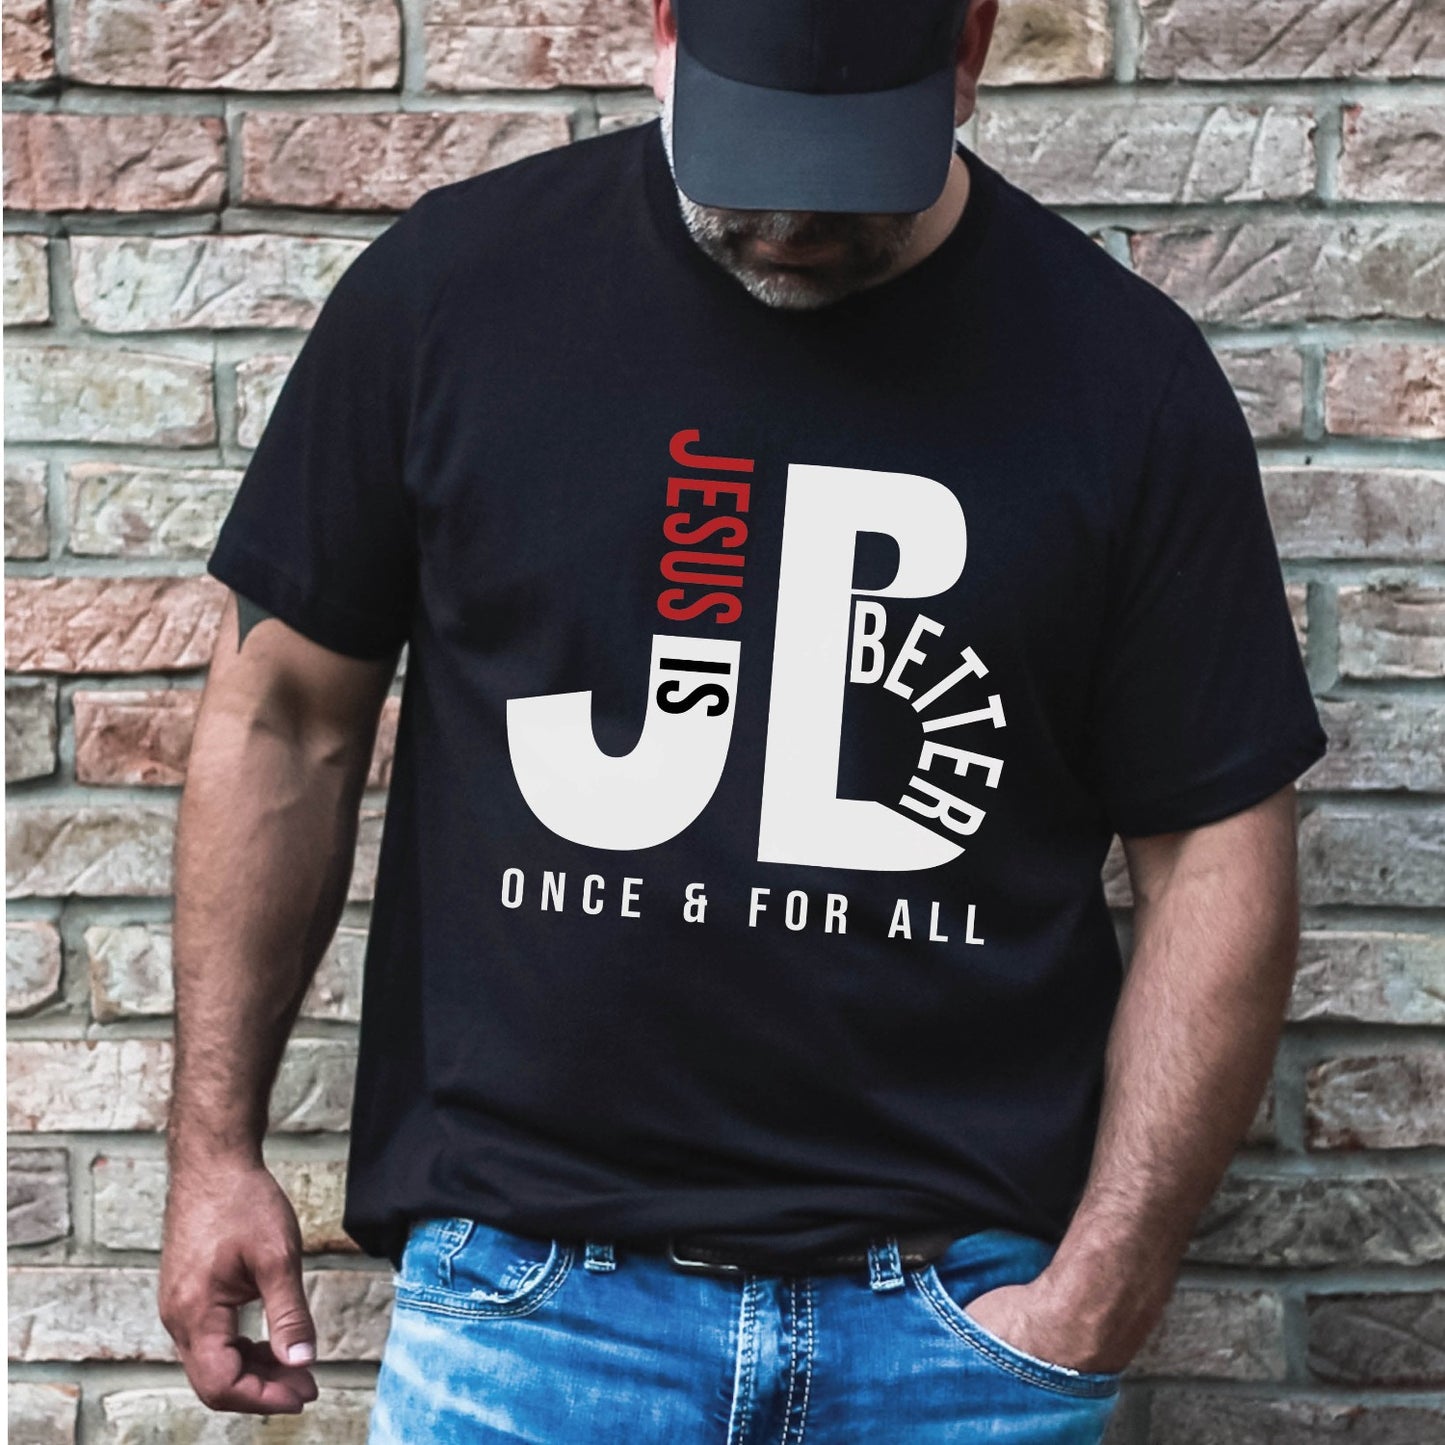 Man like a Dad wearing a "JB" typography "Jesus is Better Once and For All" design in white and red letters, based on the Christian bible book of Hebrews, printed on a black color Unisex t-shirt, created for faith-based men and women, great father's day gift for him